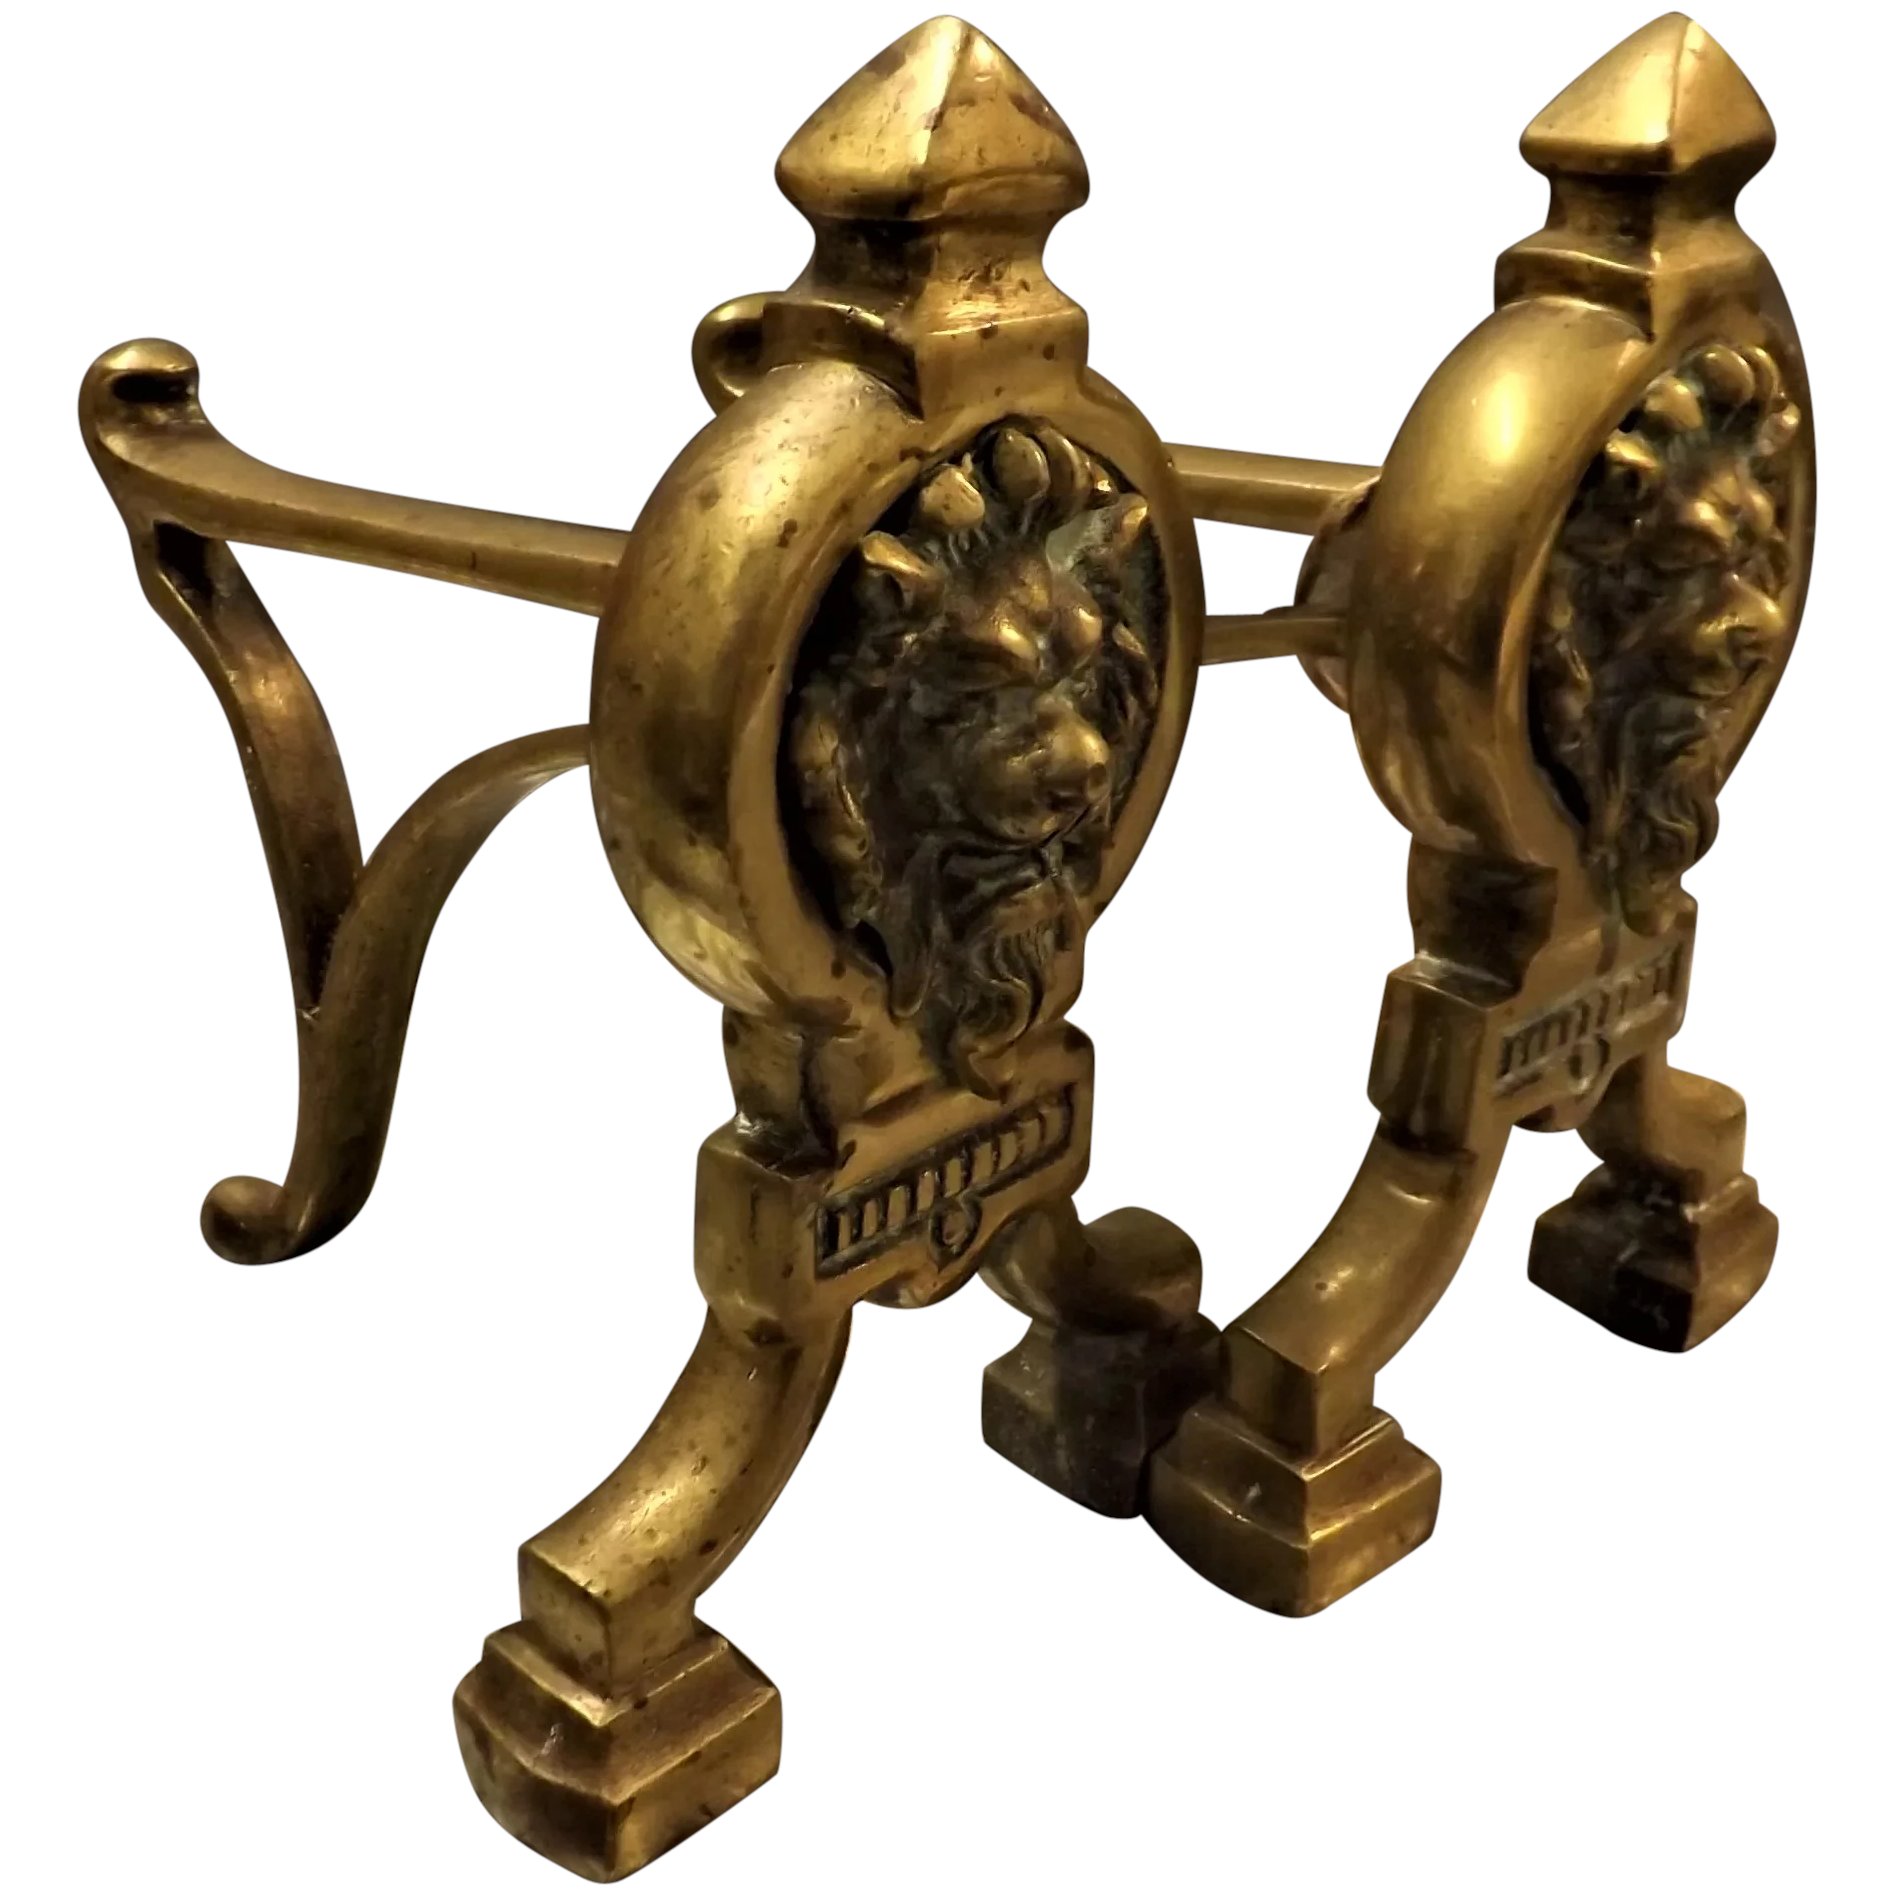 A Superb Pair of Victorian Solid Brass LION Andirons